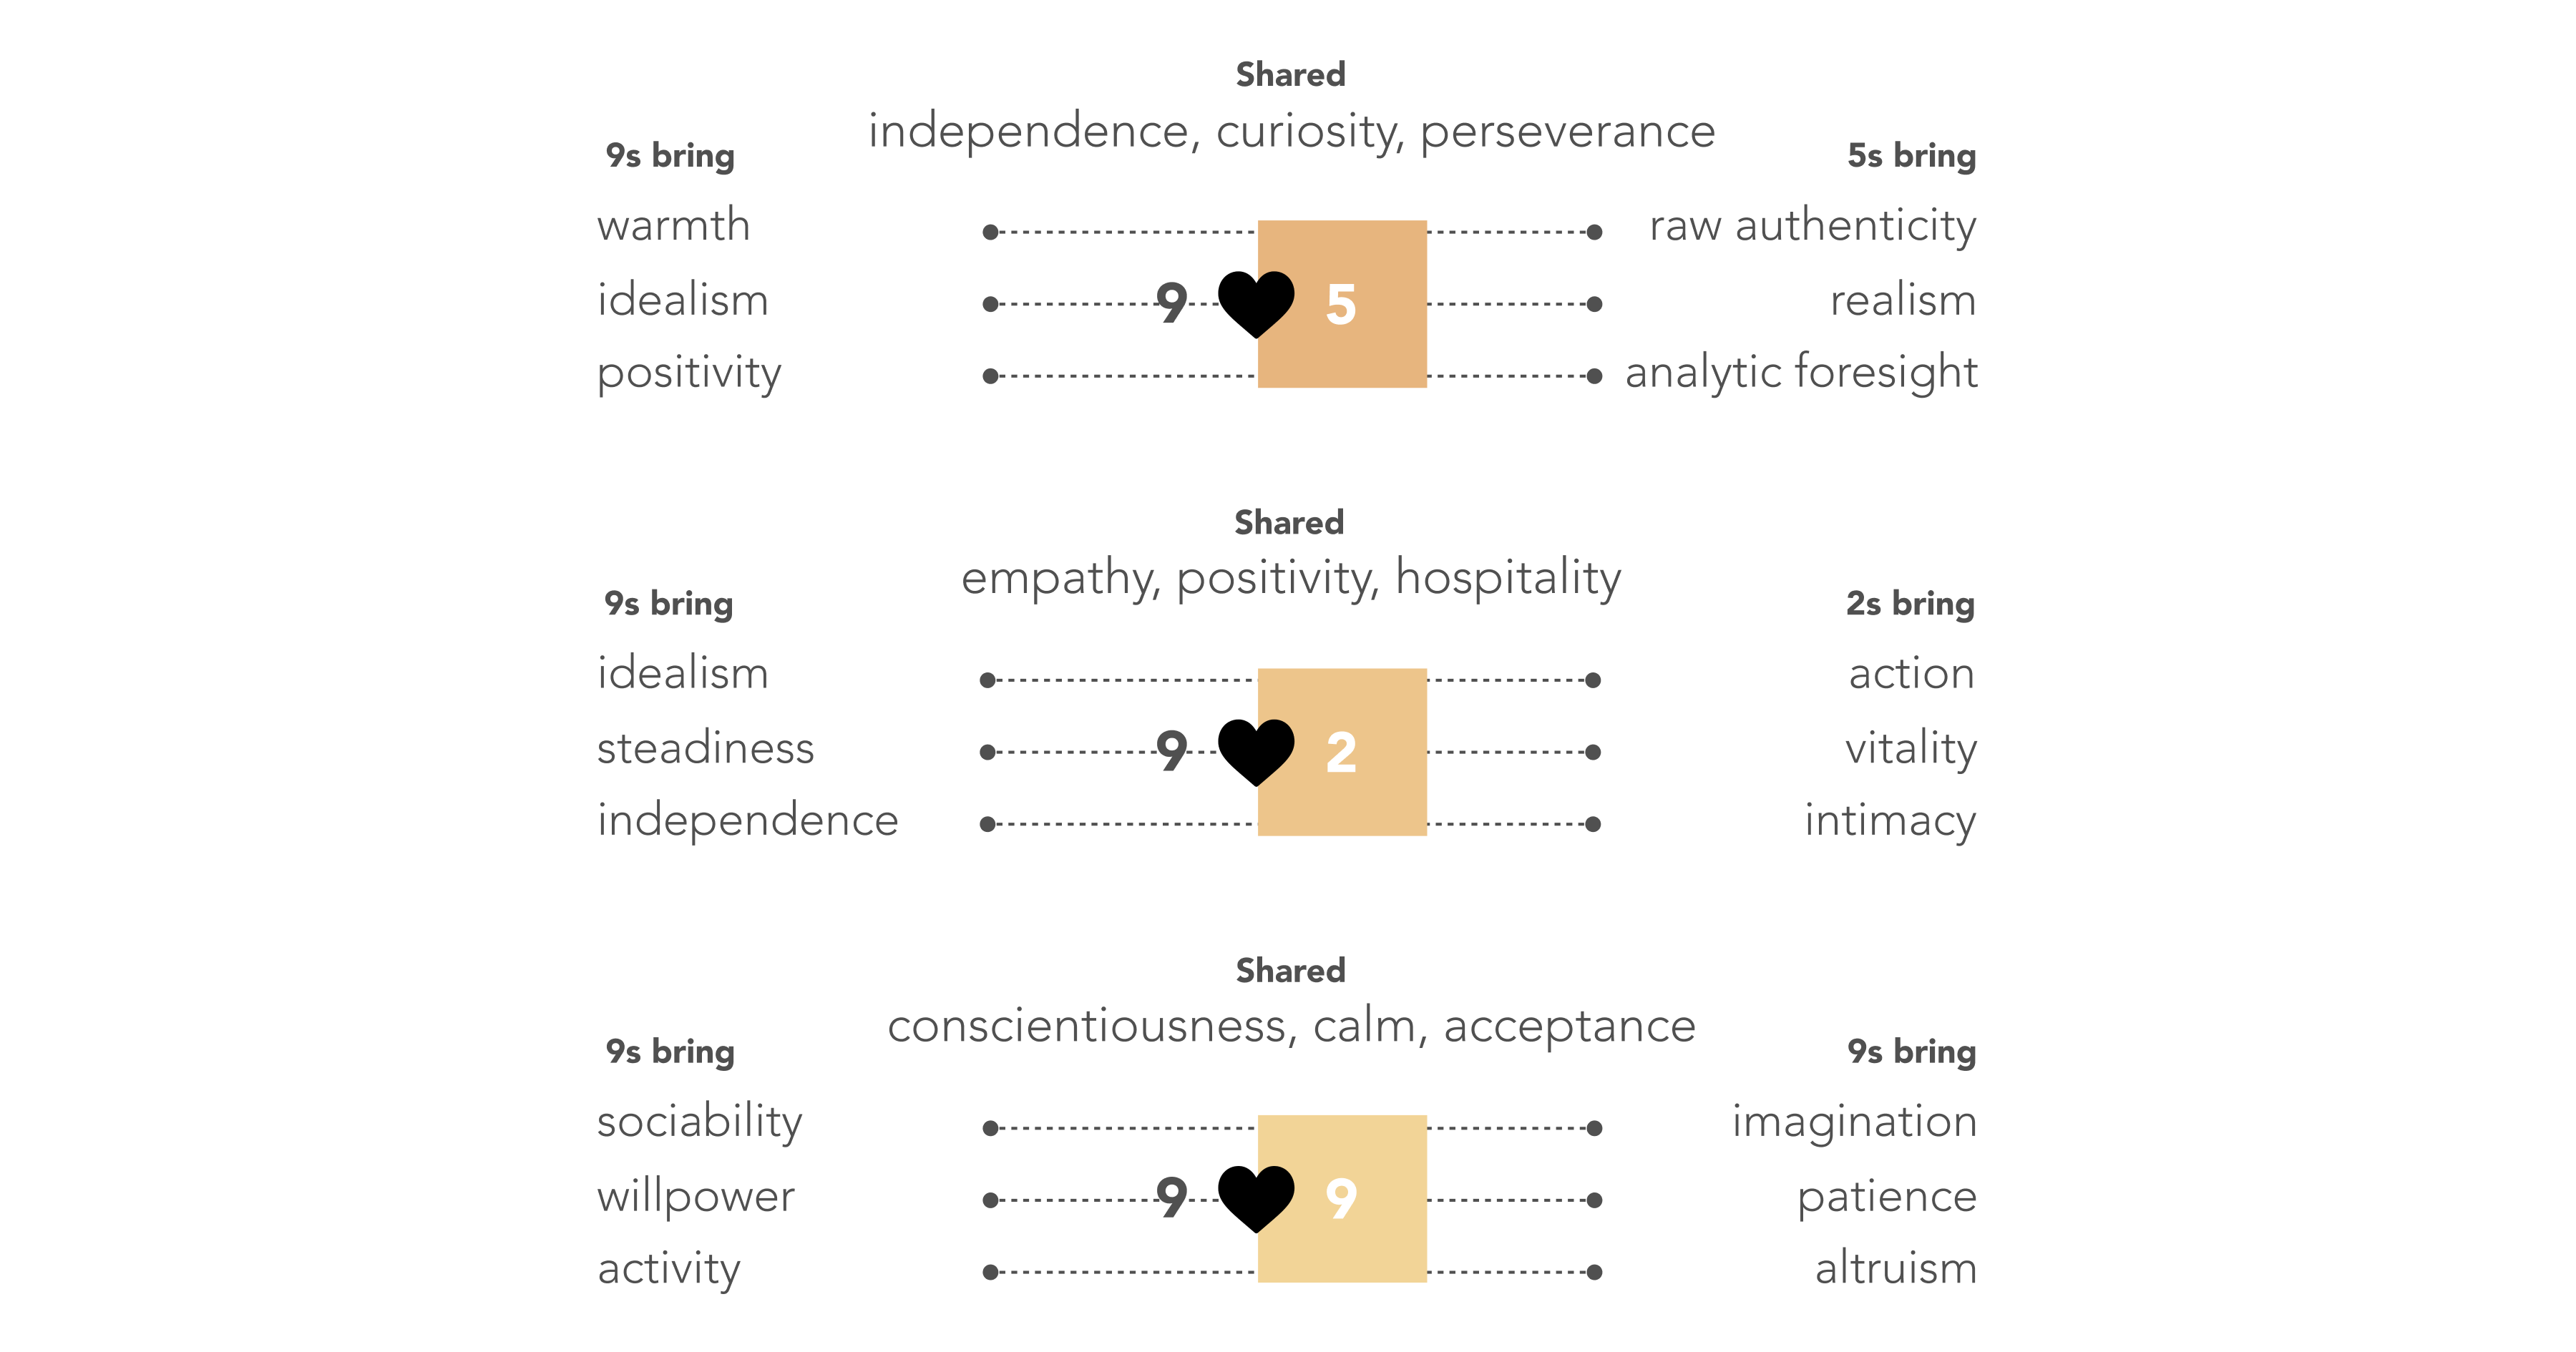 9s and 5s share independence, curiosity, perseverance. 9s bring warmth, idealism, positivity, while 5s bring raw authenticity, realism, analytic foresight. 9s and 2s share empathy, positivity, hospitality. 9s bring idealism, steadiness, independence, while 2s bring action, vitality, intimacy. 9s and 9s share conscientiousness, calm, acceptance. 9s bring sociability, willpower, activity, while the other 9s bring imagination, patience, altruism.